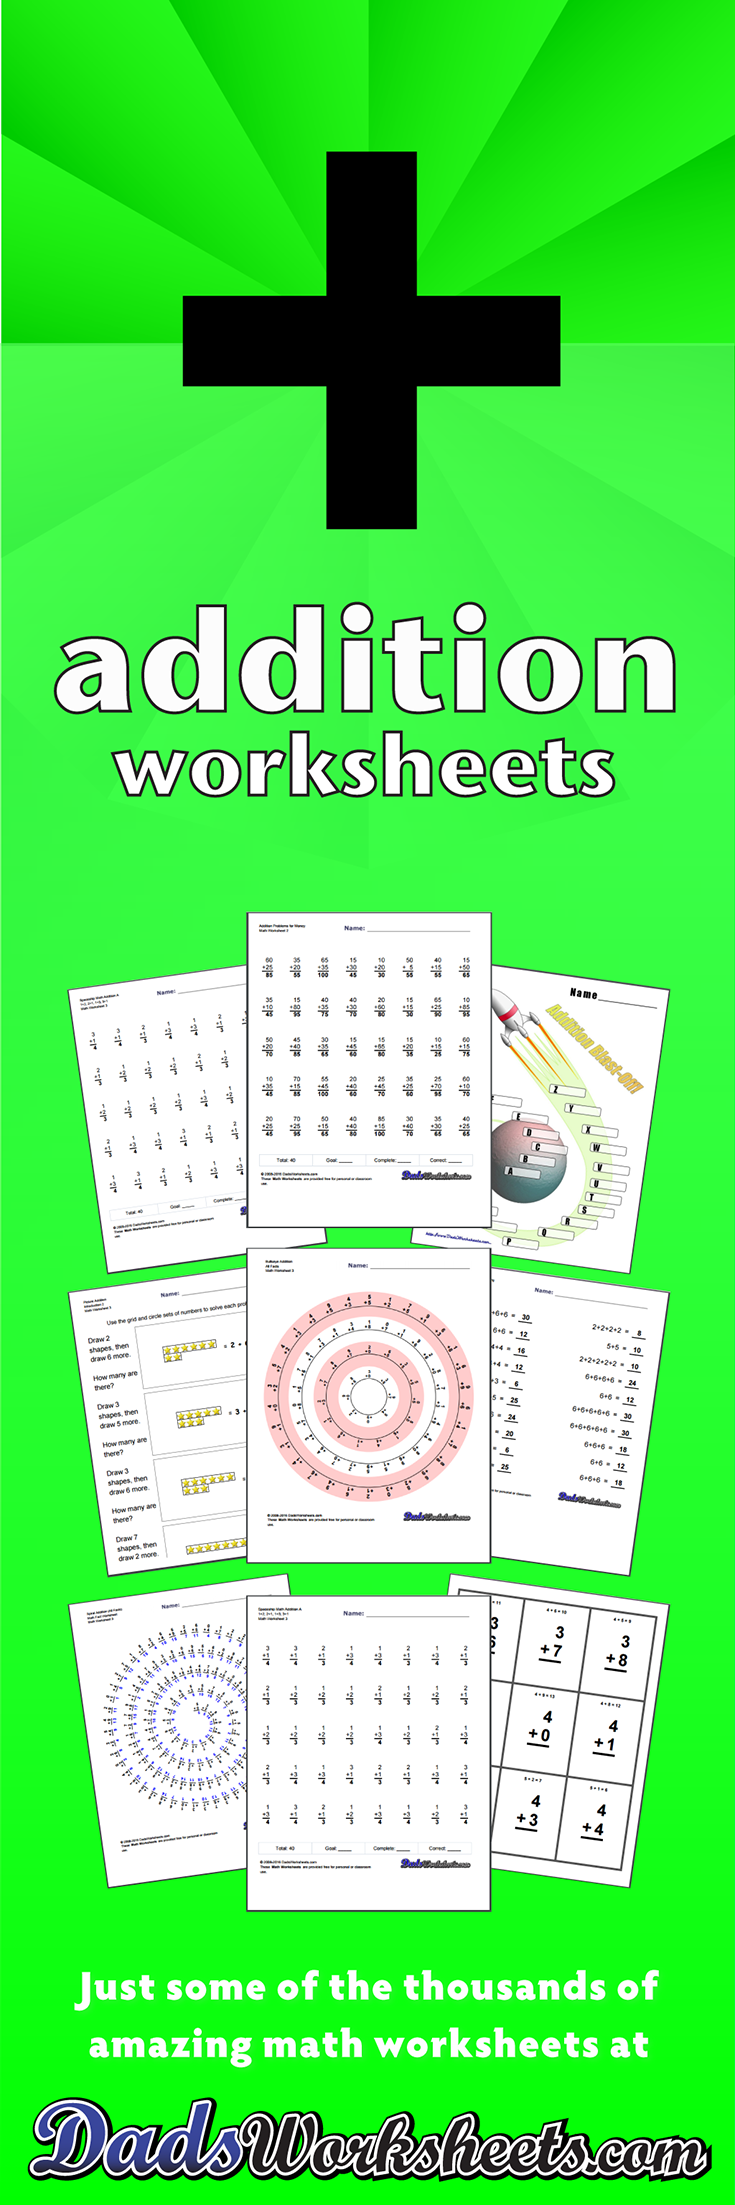 428 Addition Worksheets For You To Print Right Now